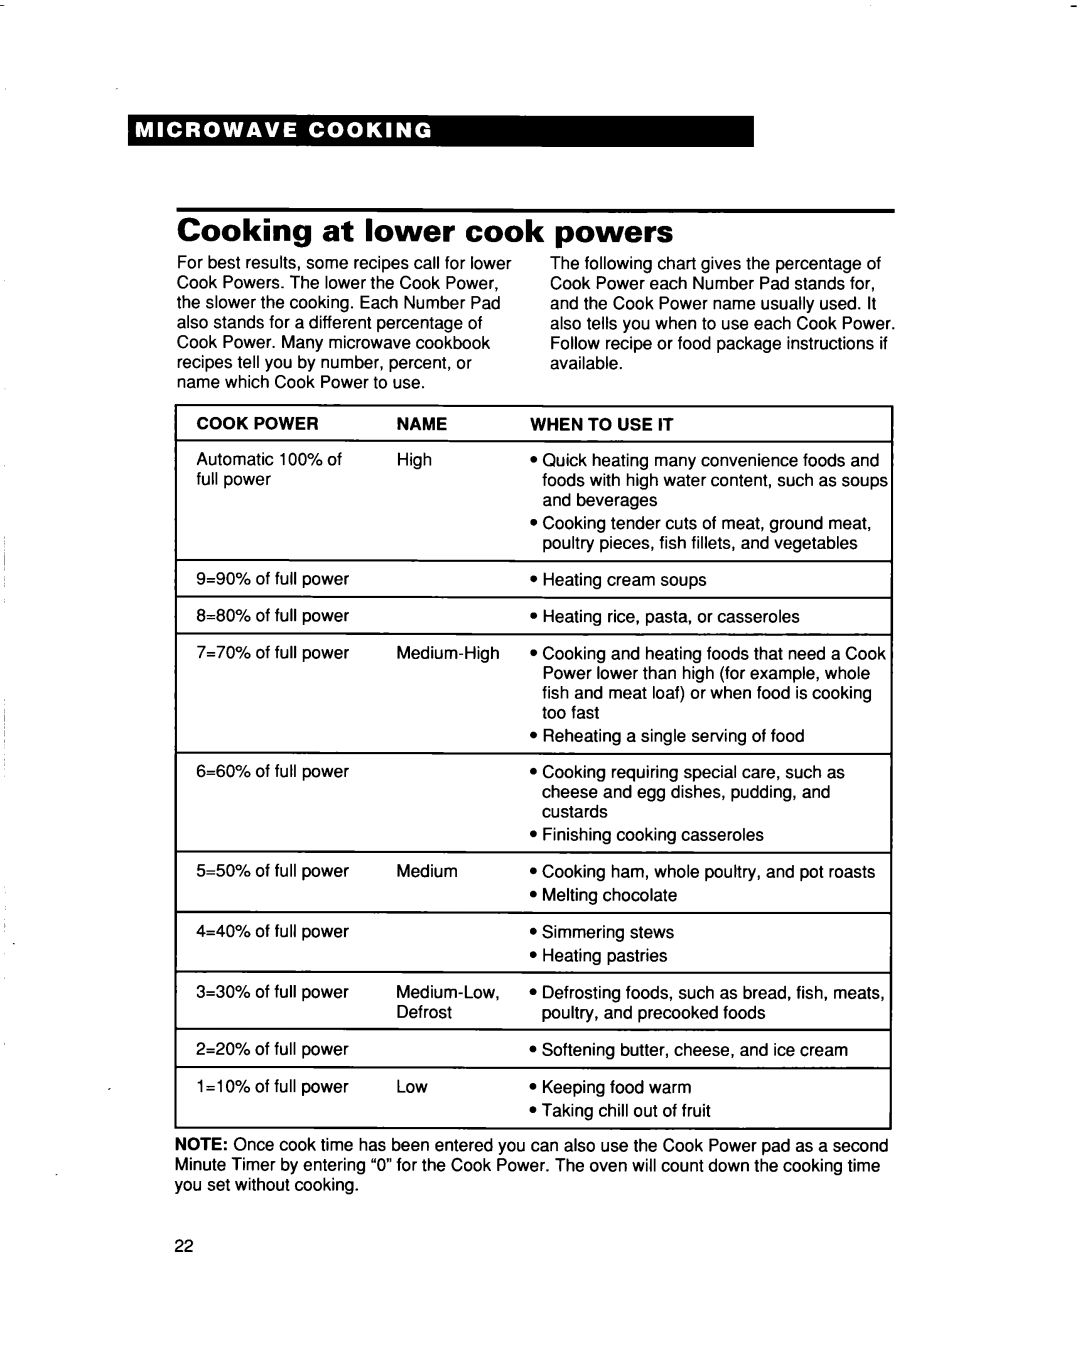 Whirlpool MH9115XB warranty Cooking at lower cook powers 